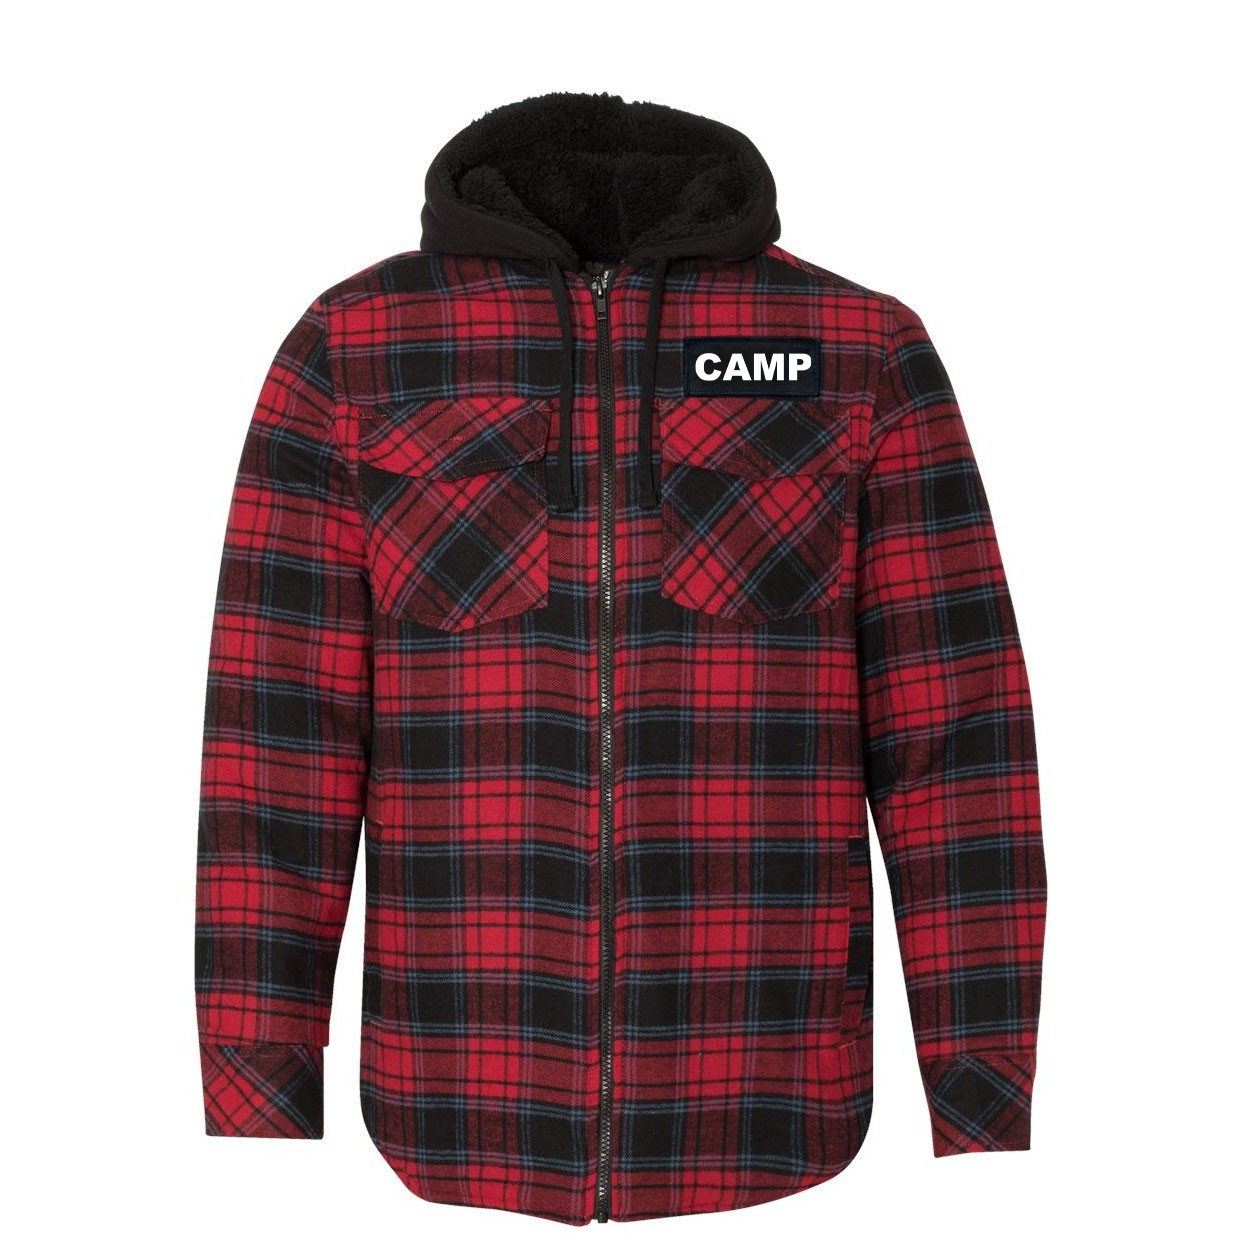 Camp Brand Logo Classic Unisex Full Zip Woven Patch Hooded Flannel Jacket Red/Black Buffalo (White Logo)